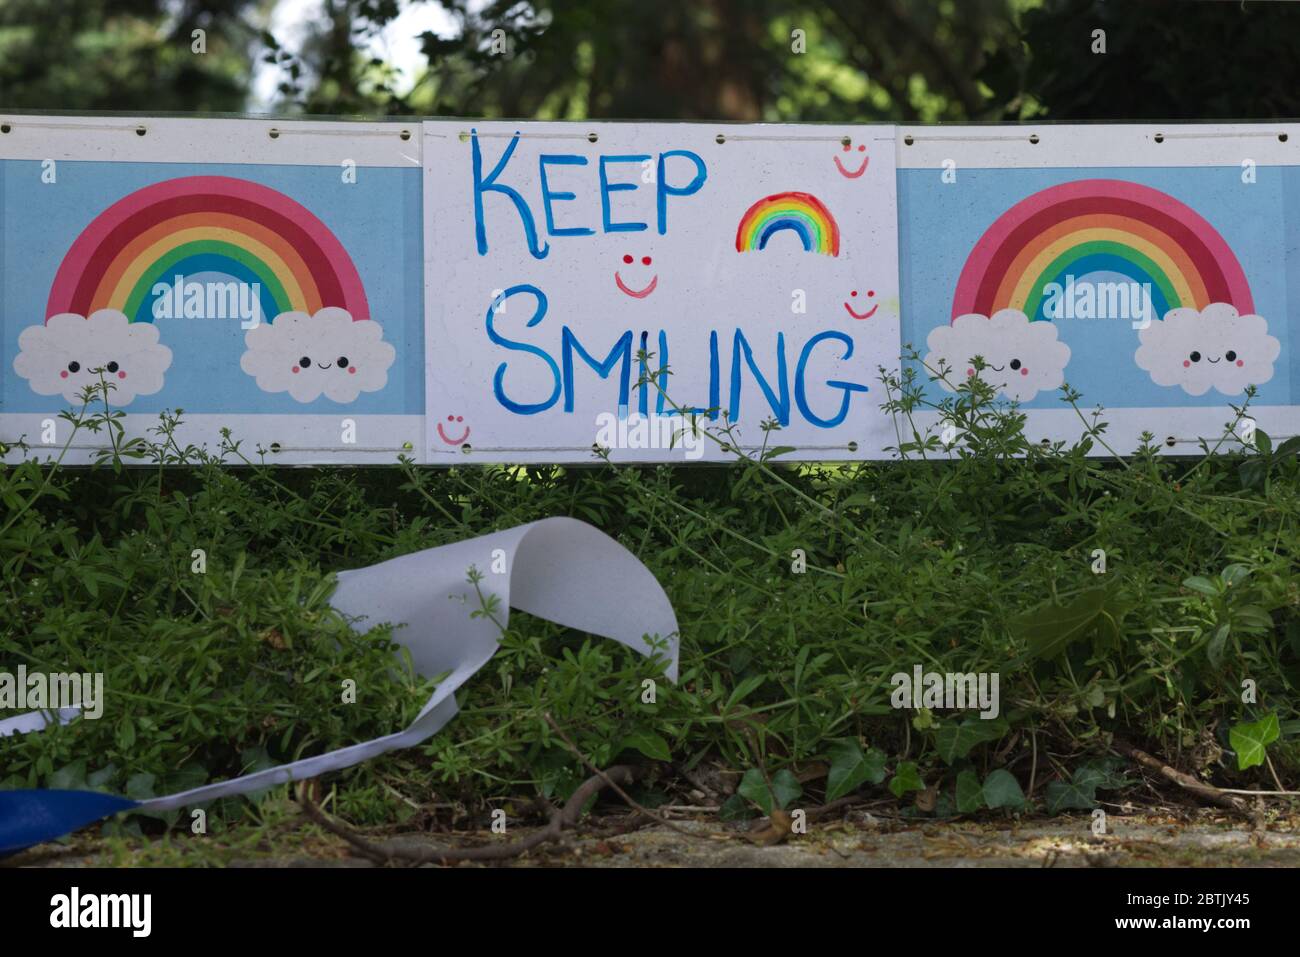 Keep smiling rainbow sign for NHS and Care workers Stock Photo